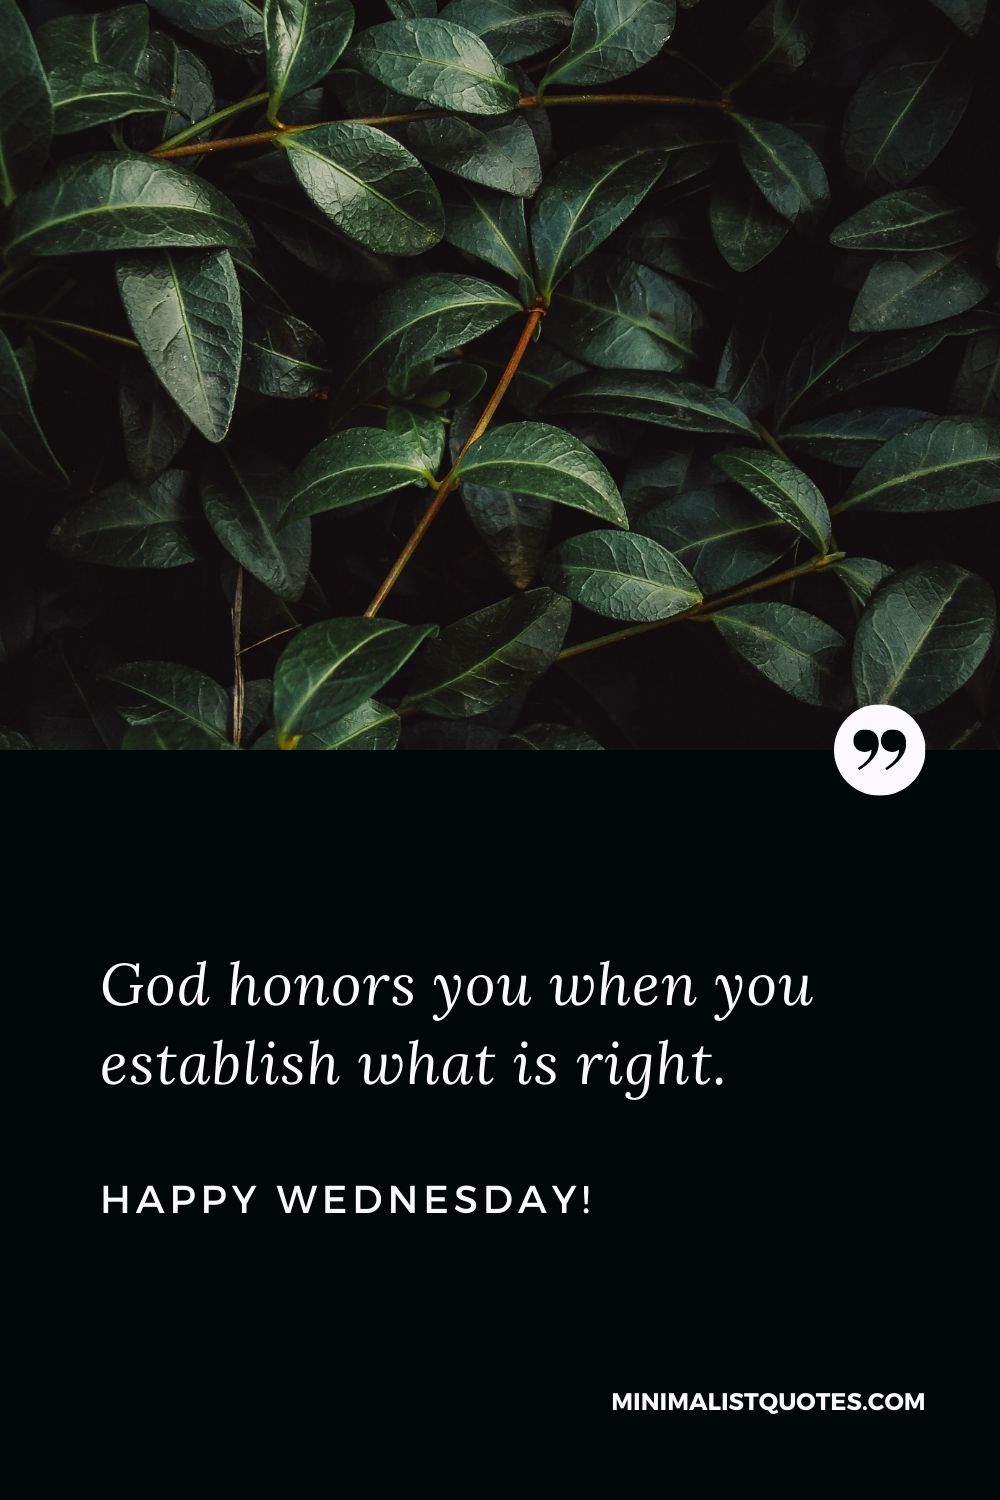 God honors you when you establish what is right. Happy Wednesday!